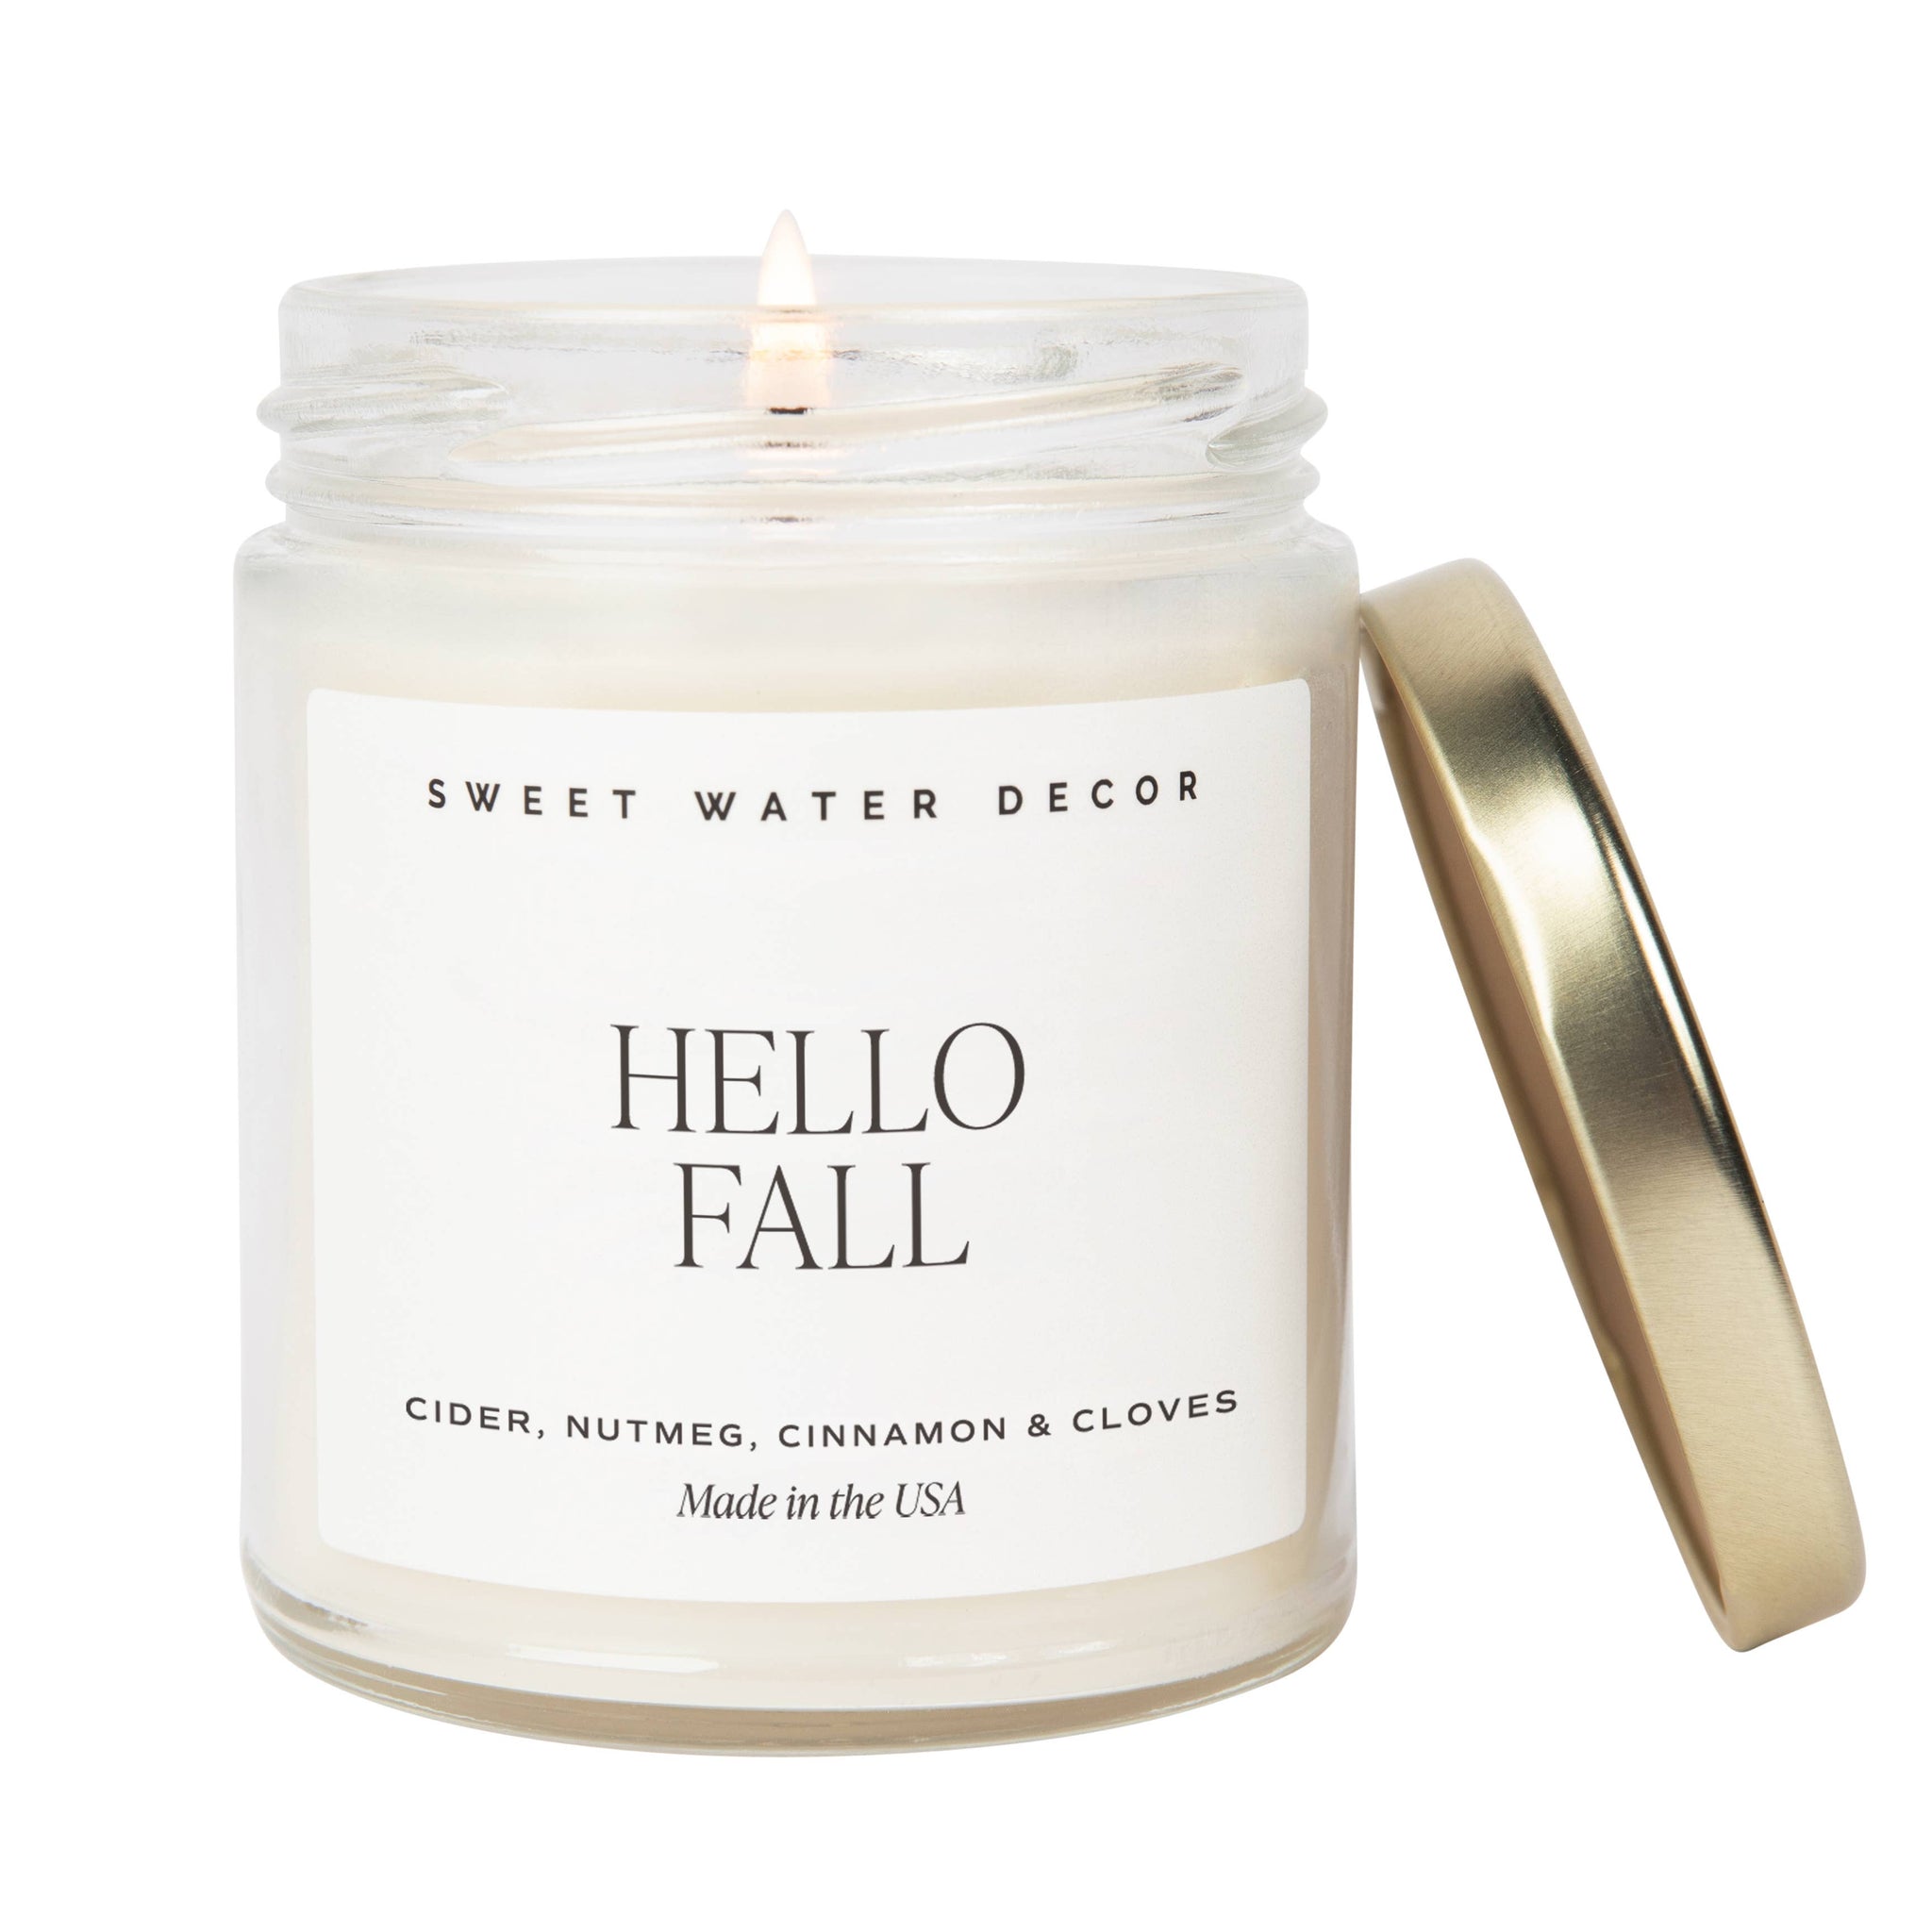 Hello Fall: 9 oz Soy Candle